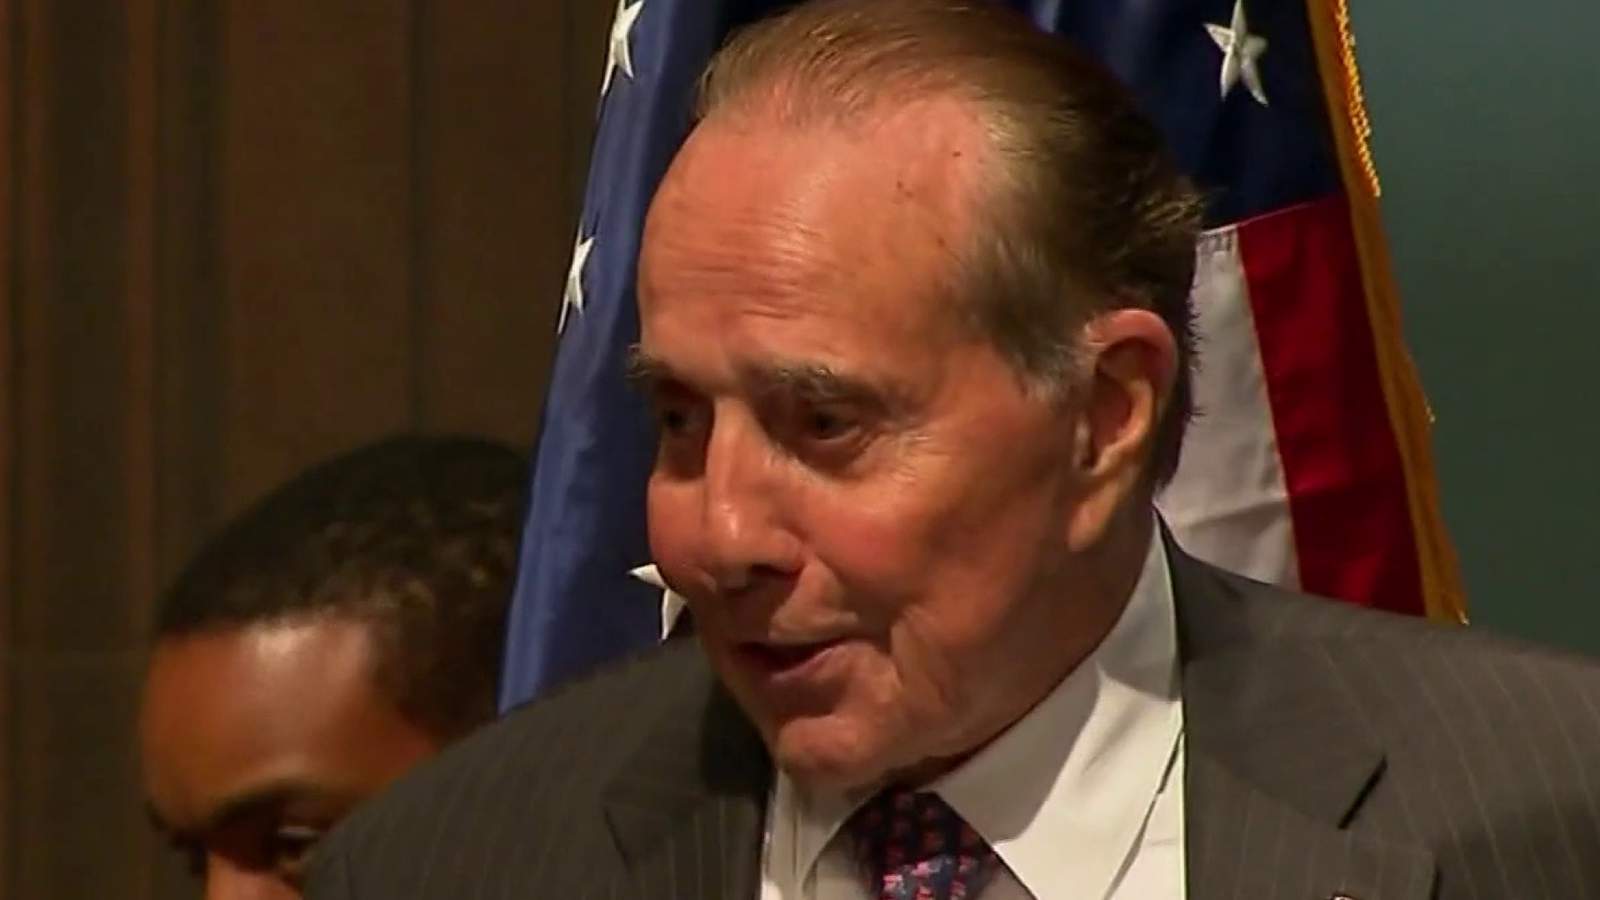 Retired U.S. Sen. Bob Dole diagnosed with stage 4 lung cancer